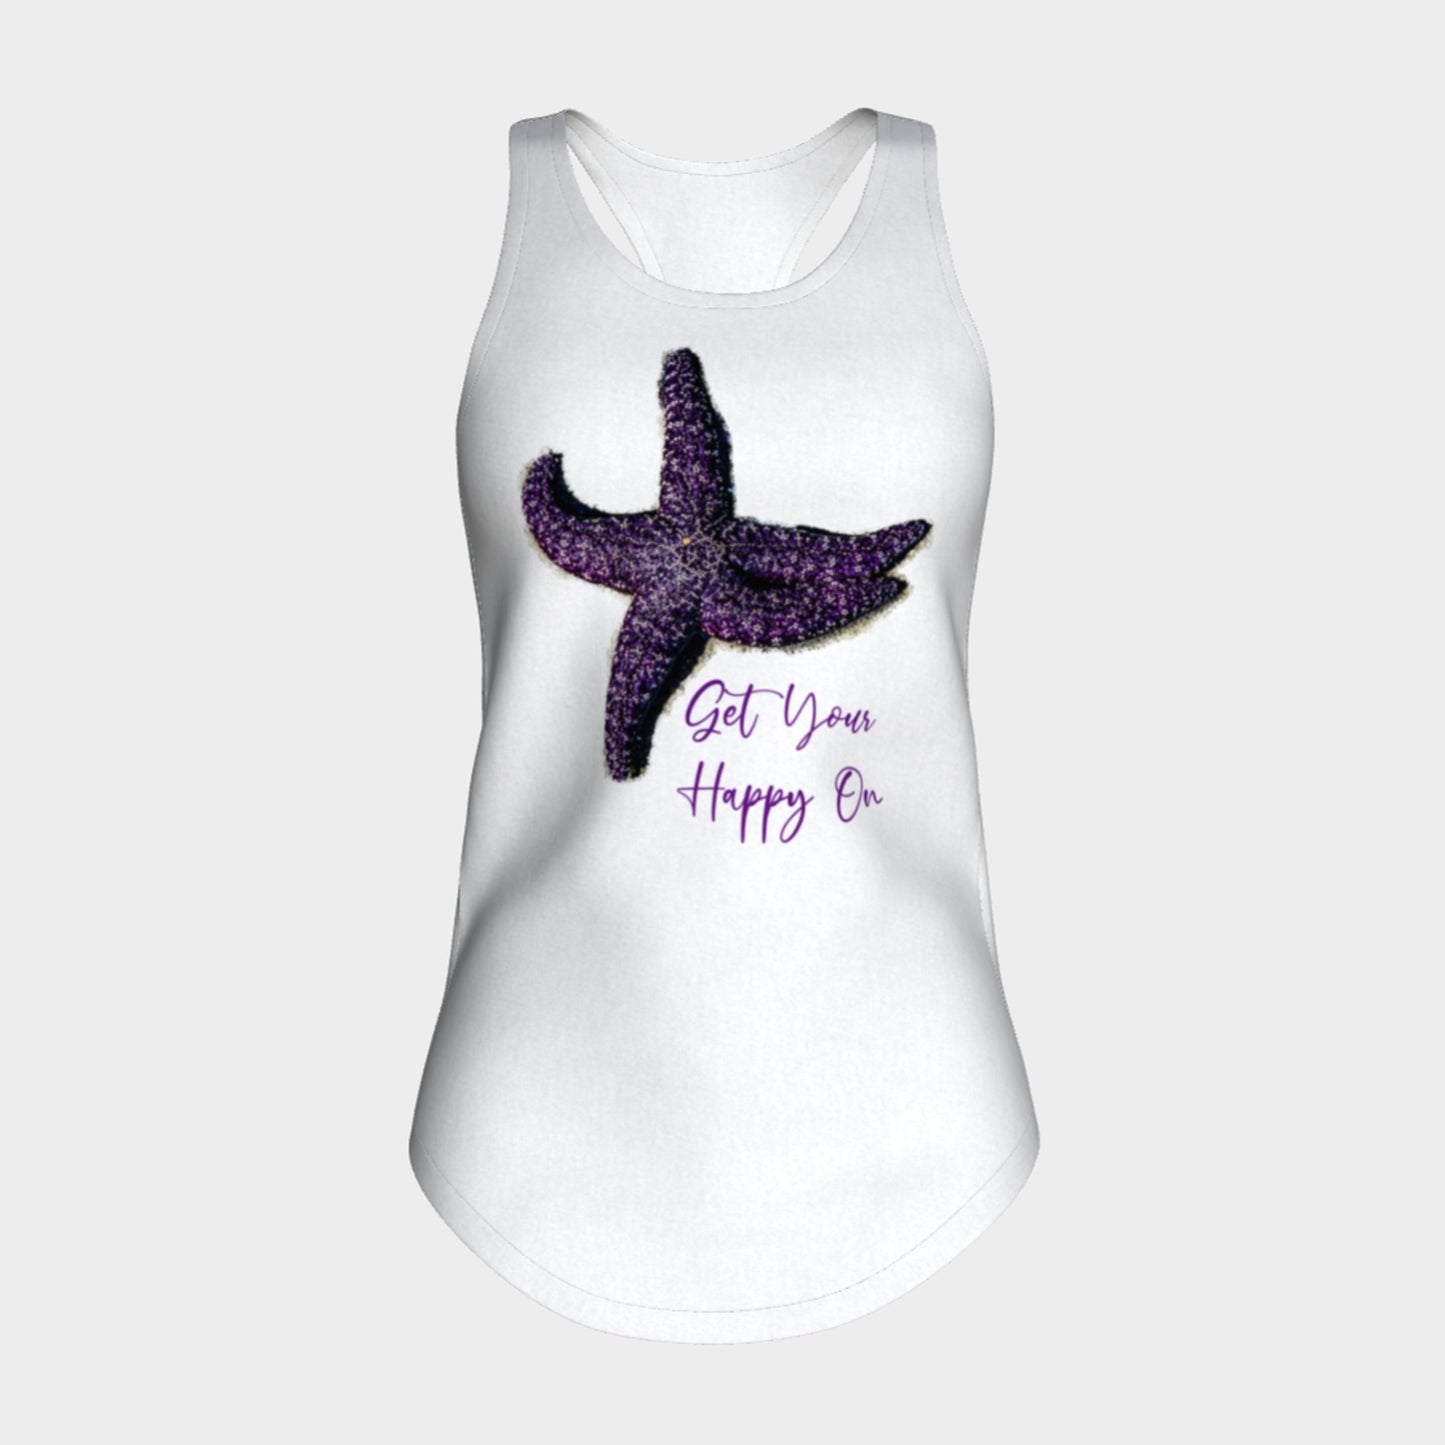 Get Your Happy On Racerback Tank Top  Excellent choice for the summer or for working out.   Made from 60% spun cotton and 40% poly for a mix of comfort and performance, you get it all (including my photography and digital art) with this custom printed racerback tank top.